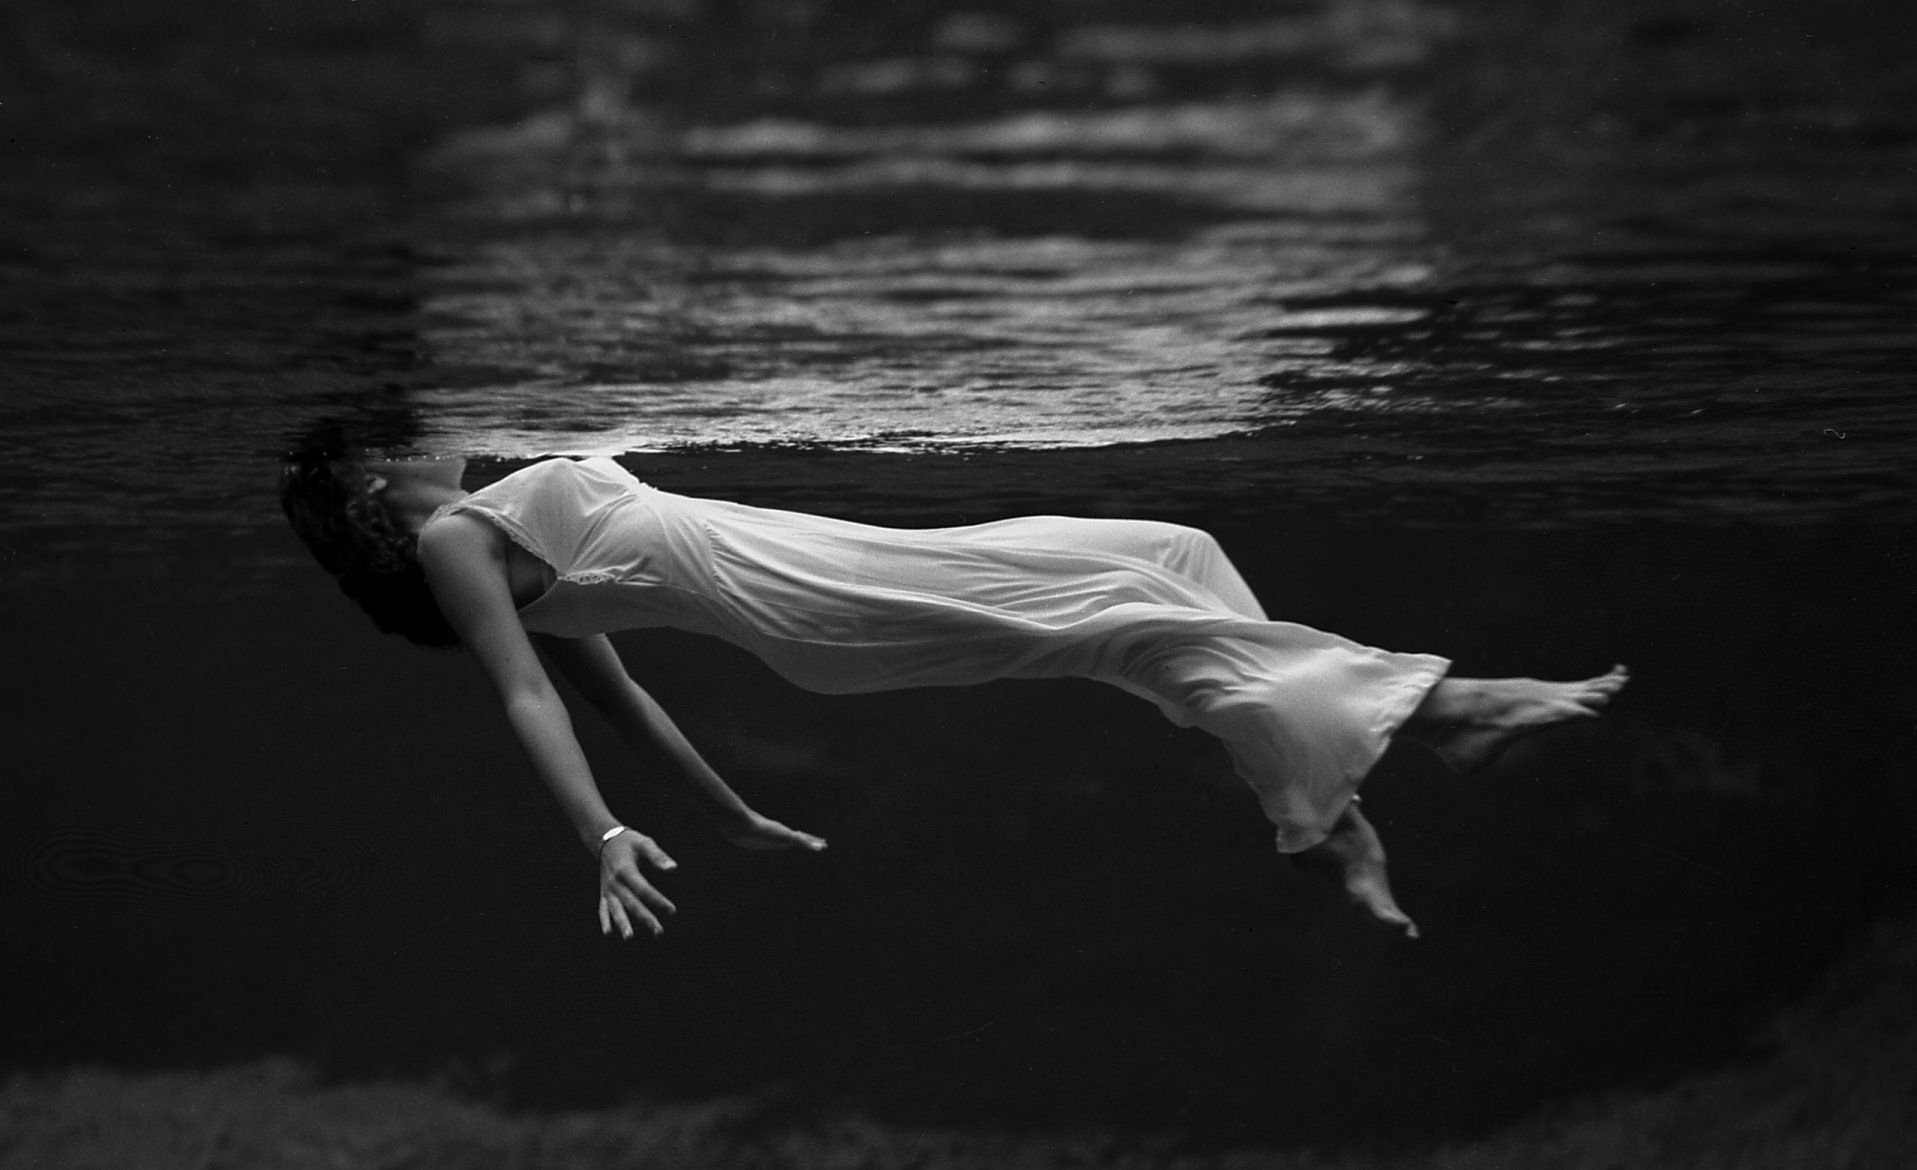 A woman in white is floating under water - Creepy